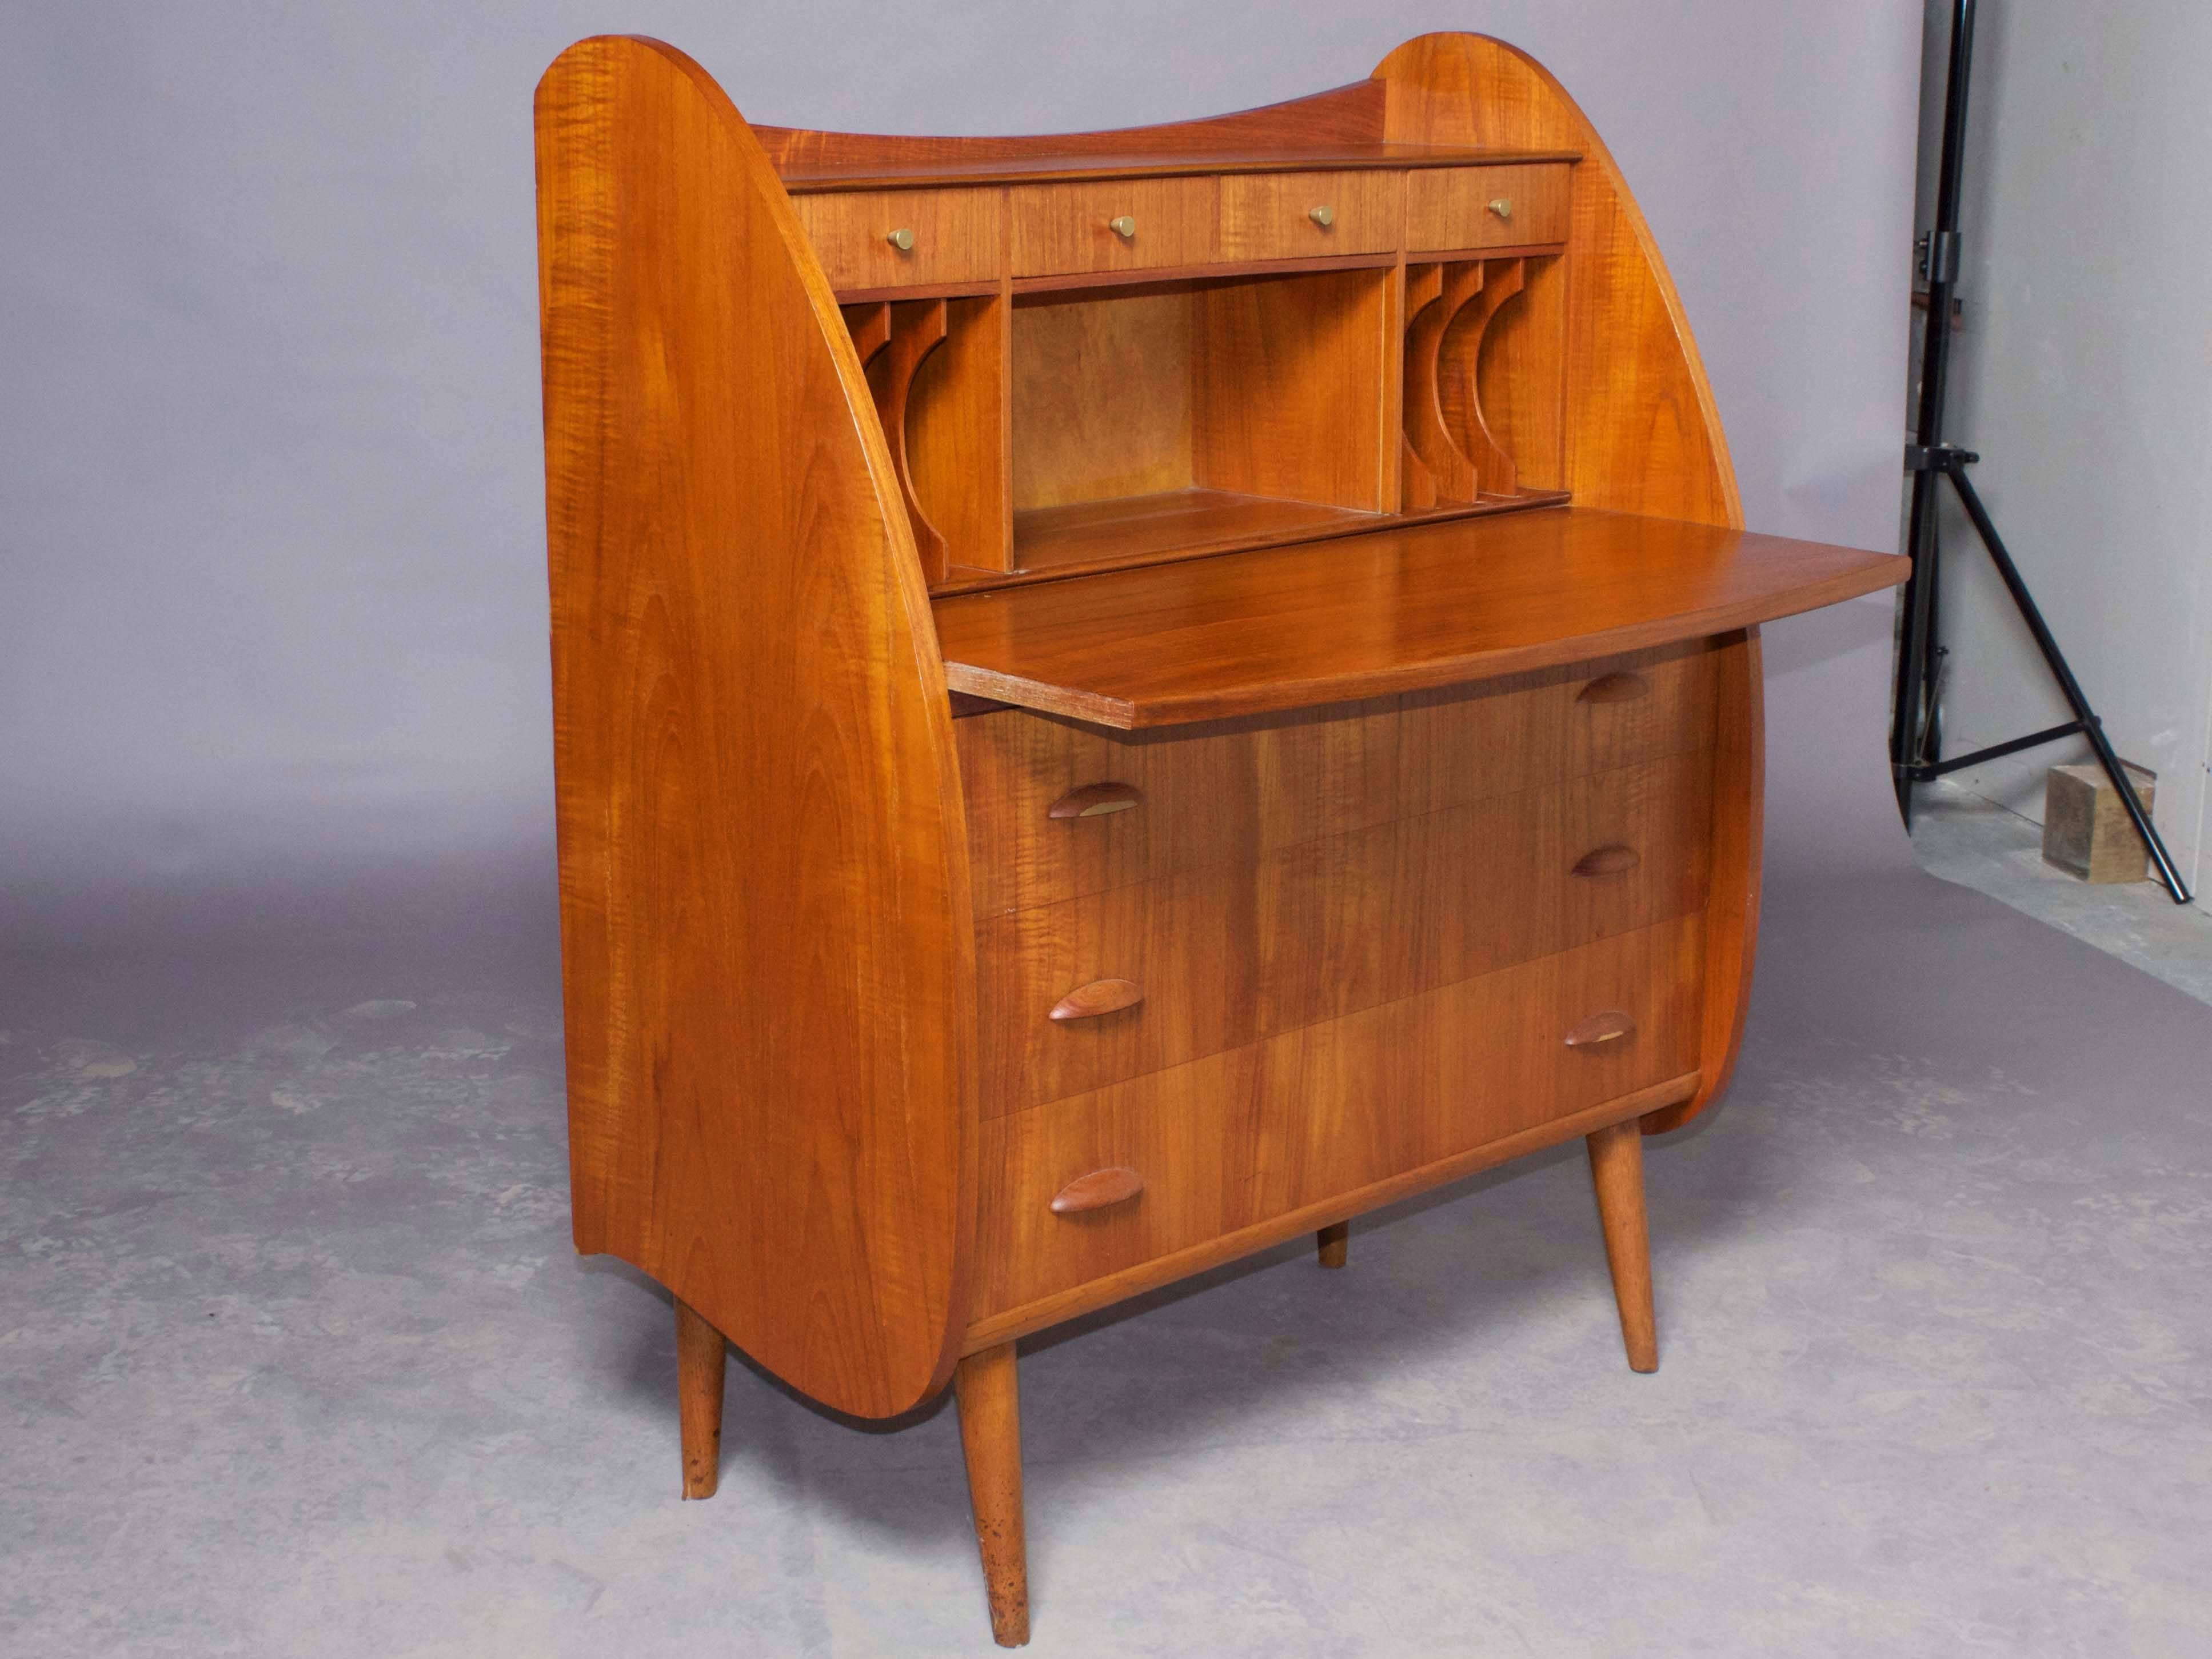 Vintage 1950s Secretary Desk from Denmark

This Vintage Secretary is in like new condition. With a width of only 37